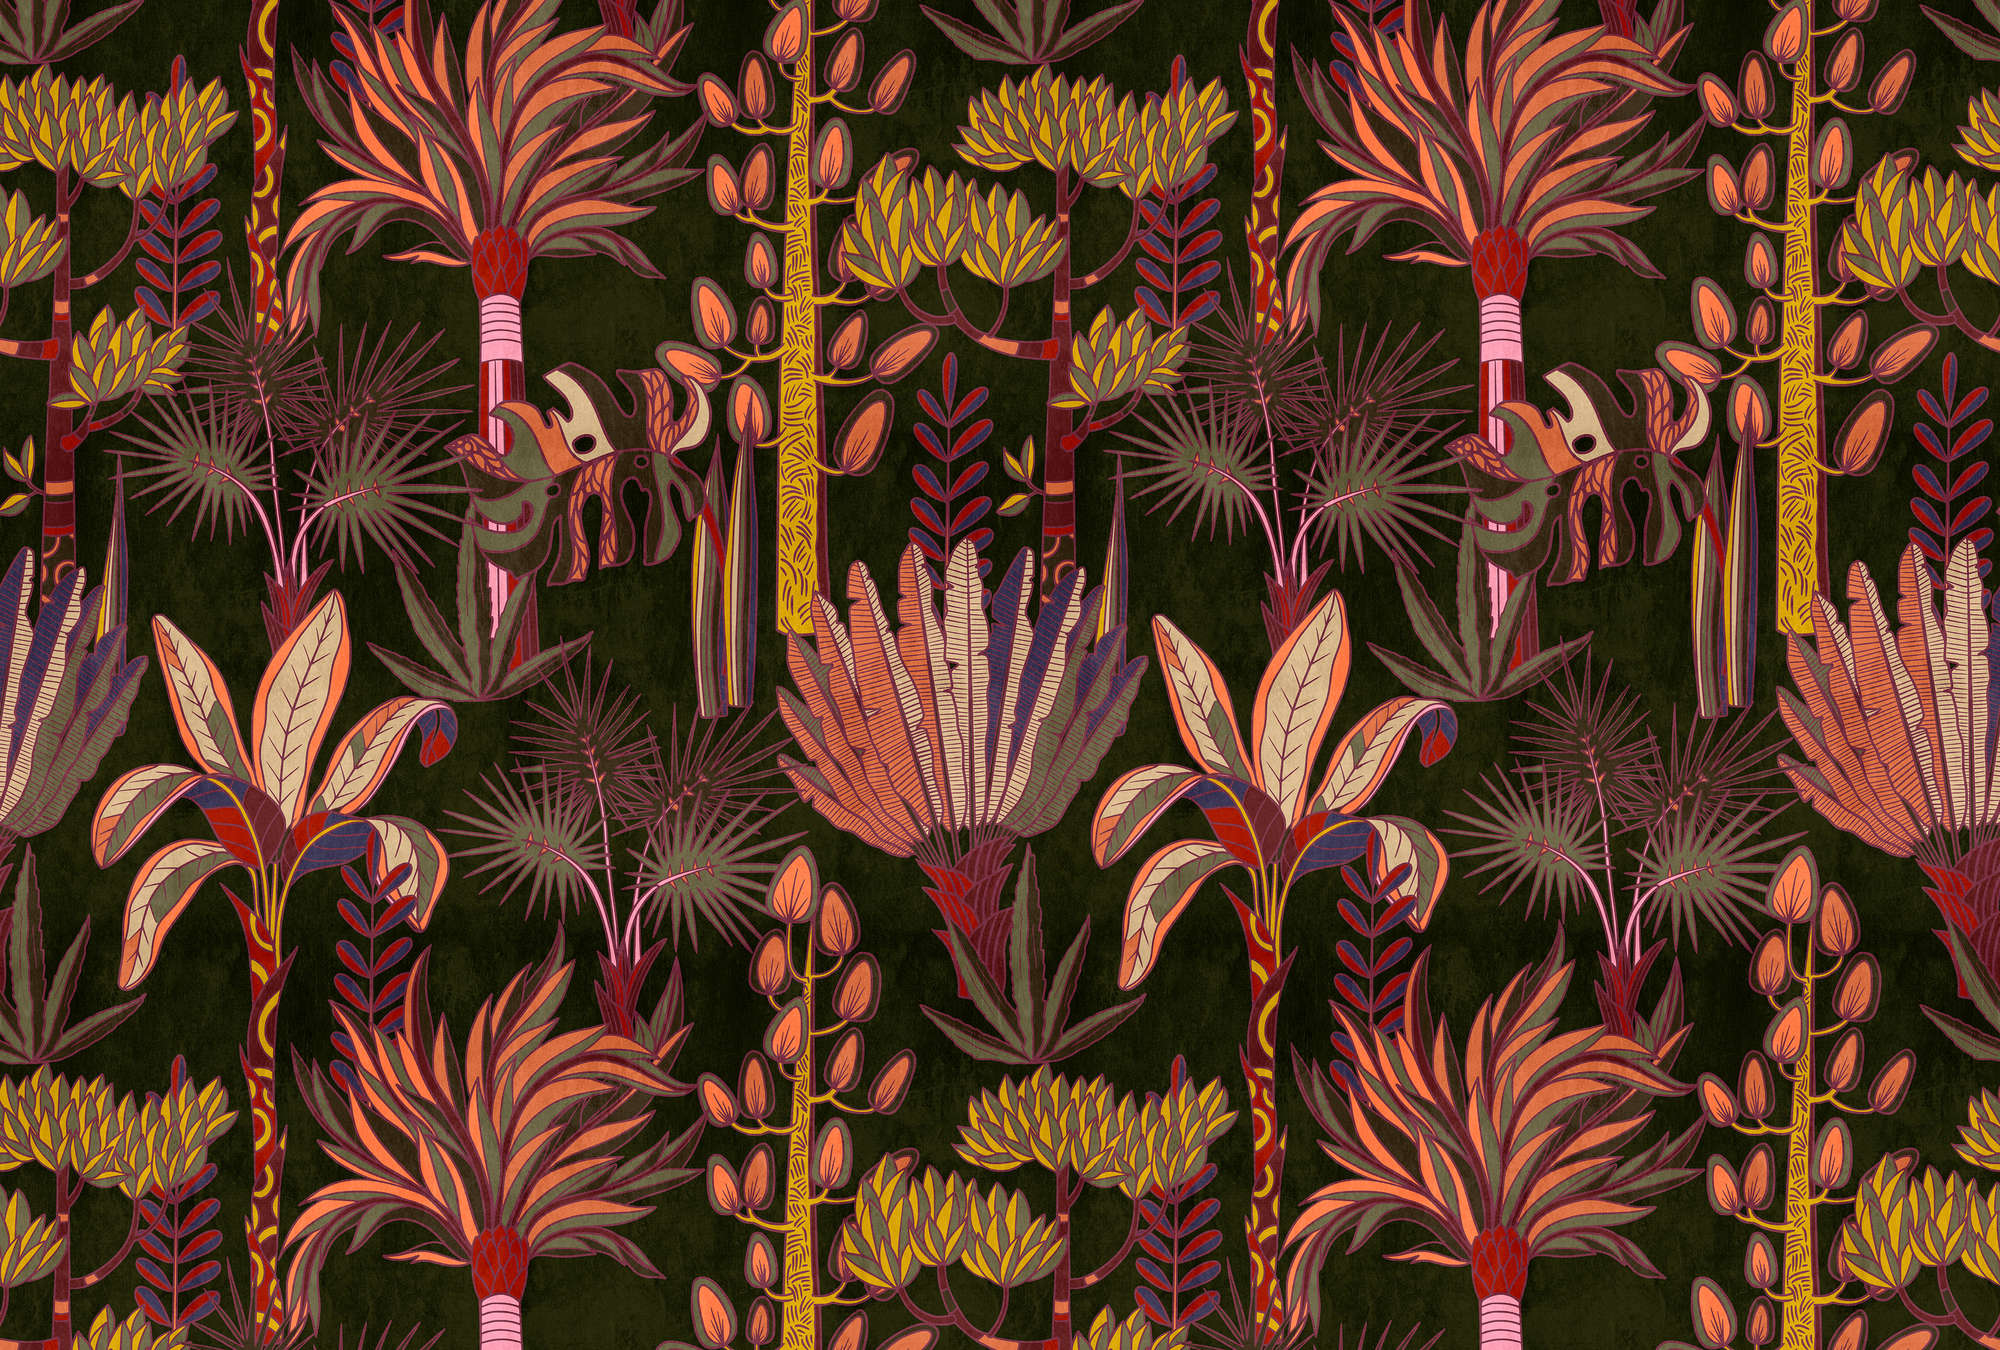             Lagos 1 - palm trees mural colourful graphic style in textile look
        